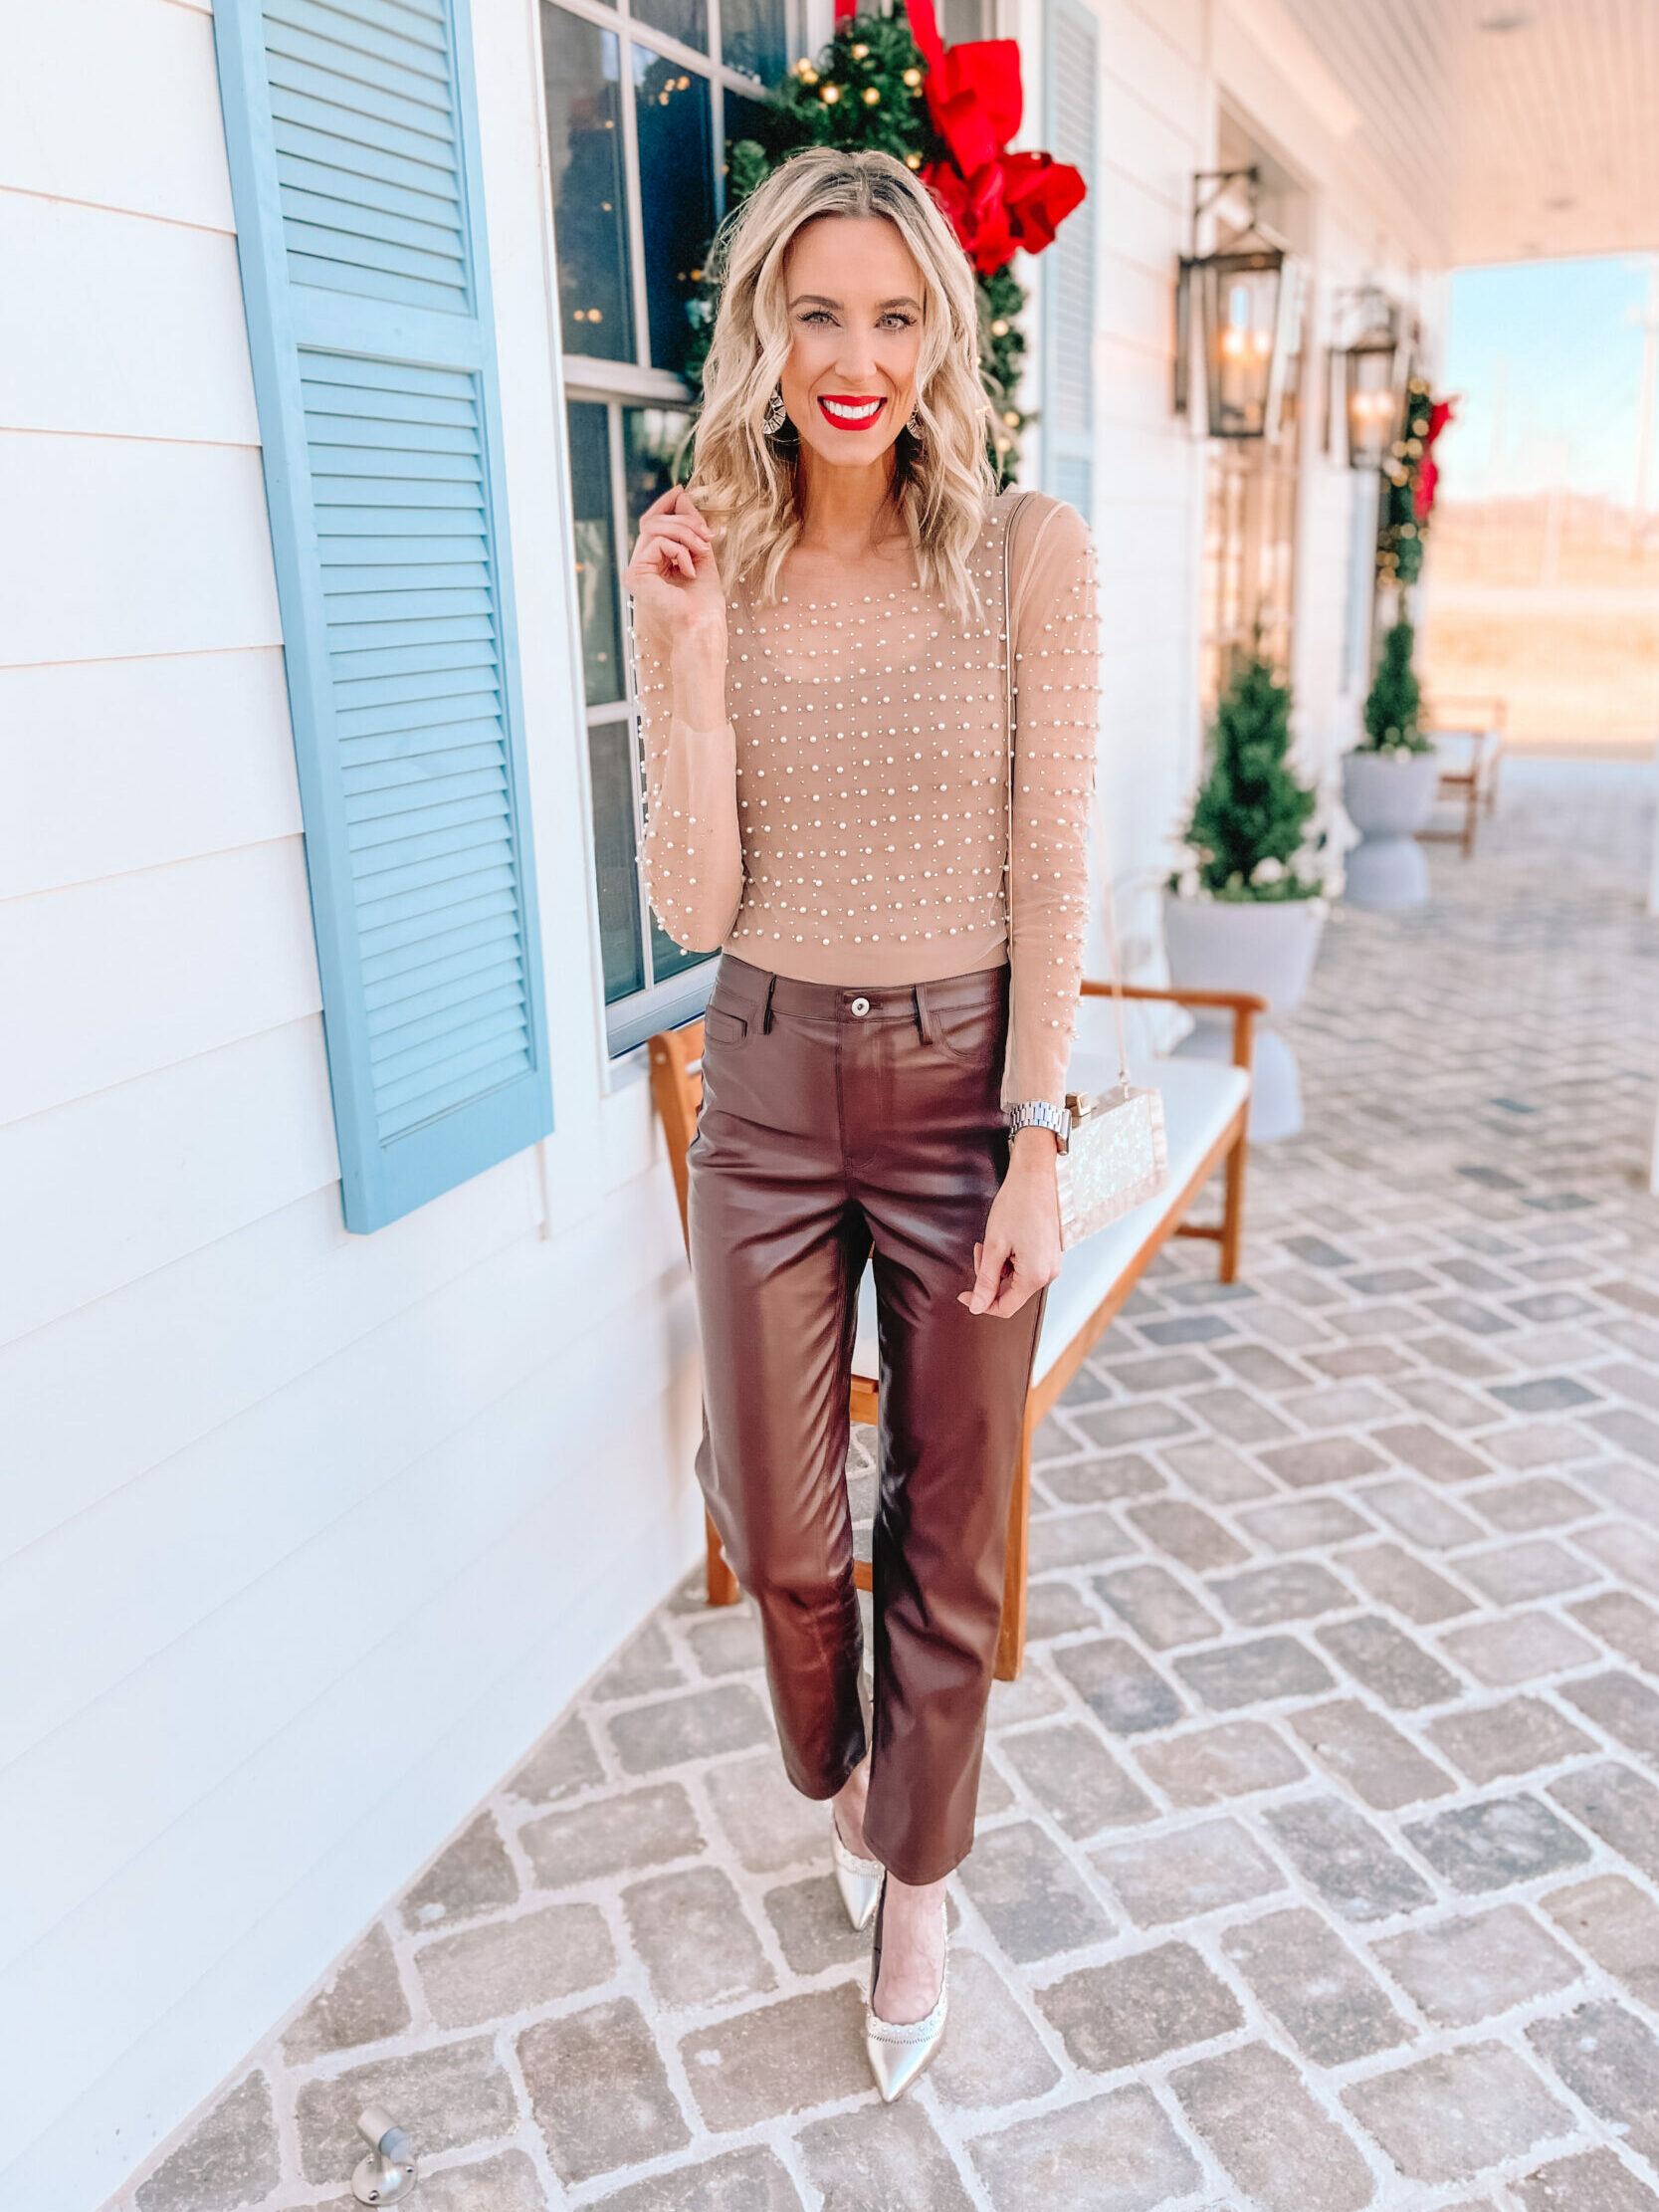 I am loving this Amazon sheer pearl rhinestone top for NYE! I styled it with my brown leather pants and gold heels. You can wear it so many ways though!